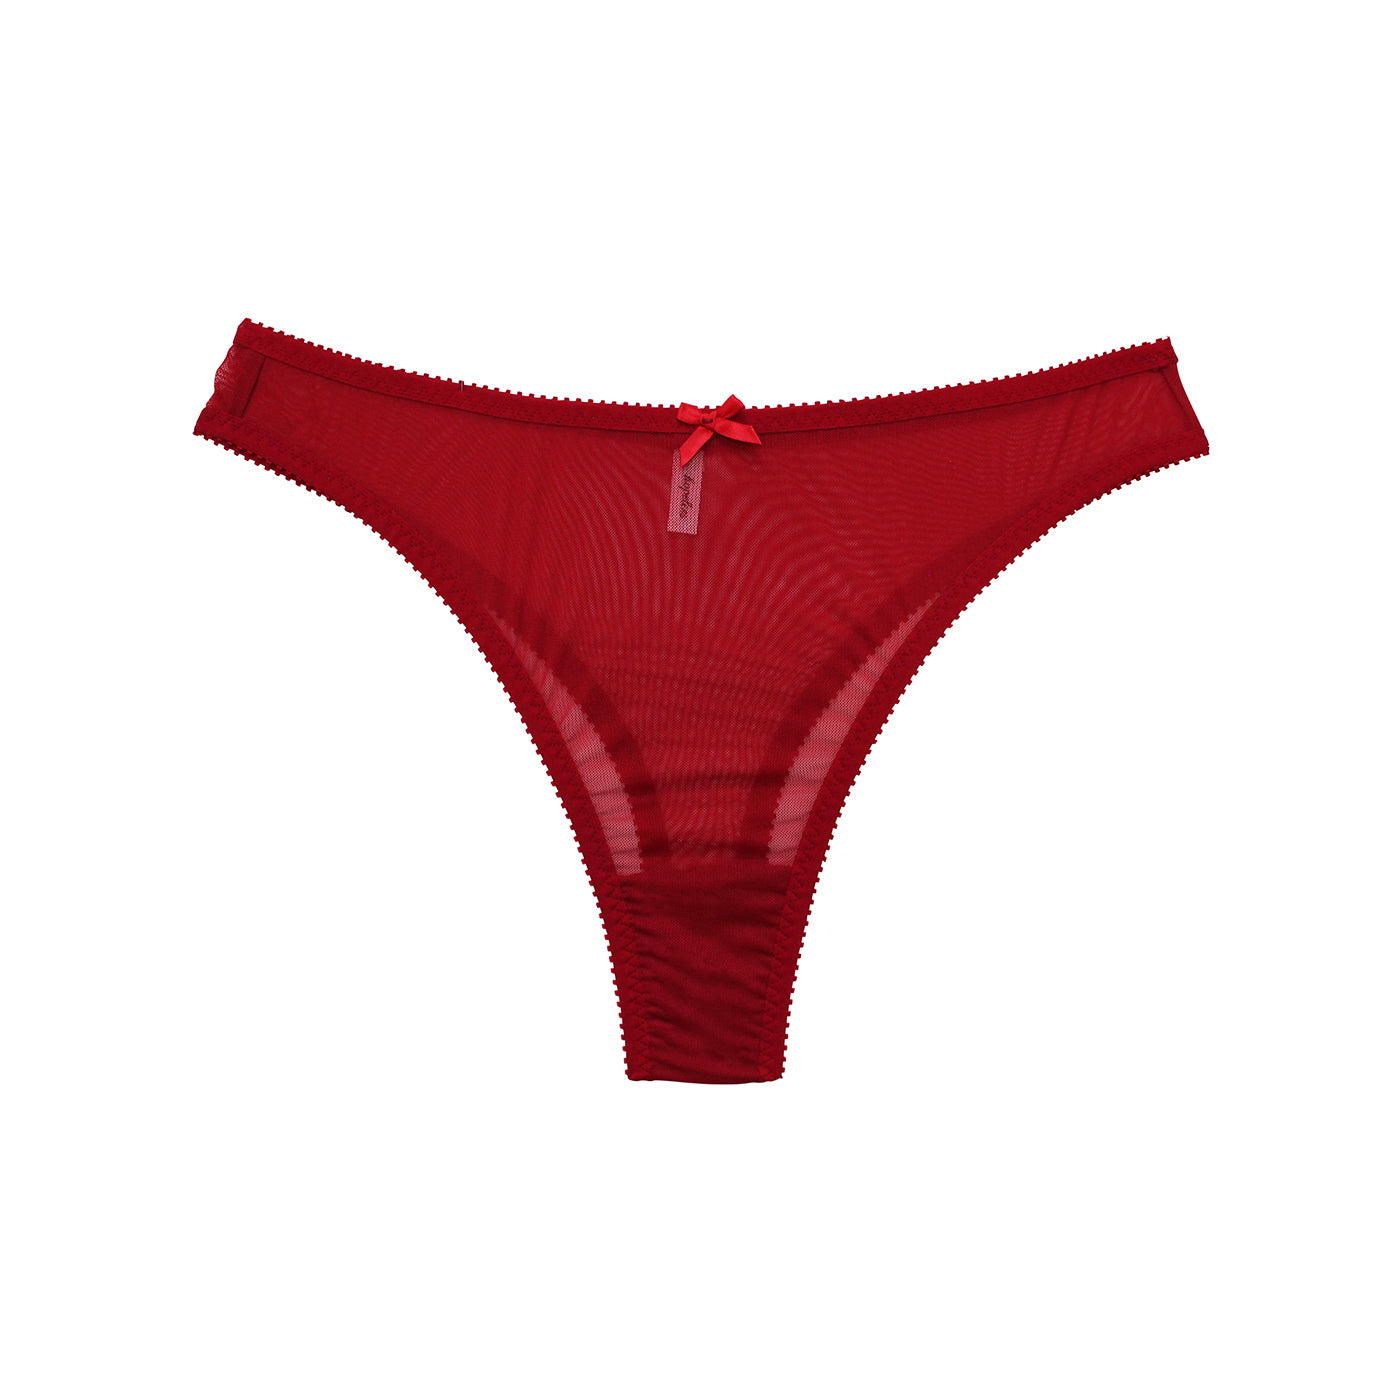 Red Mesh High Waisted Thong  Made in Australia by Hopeless Lingerie